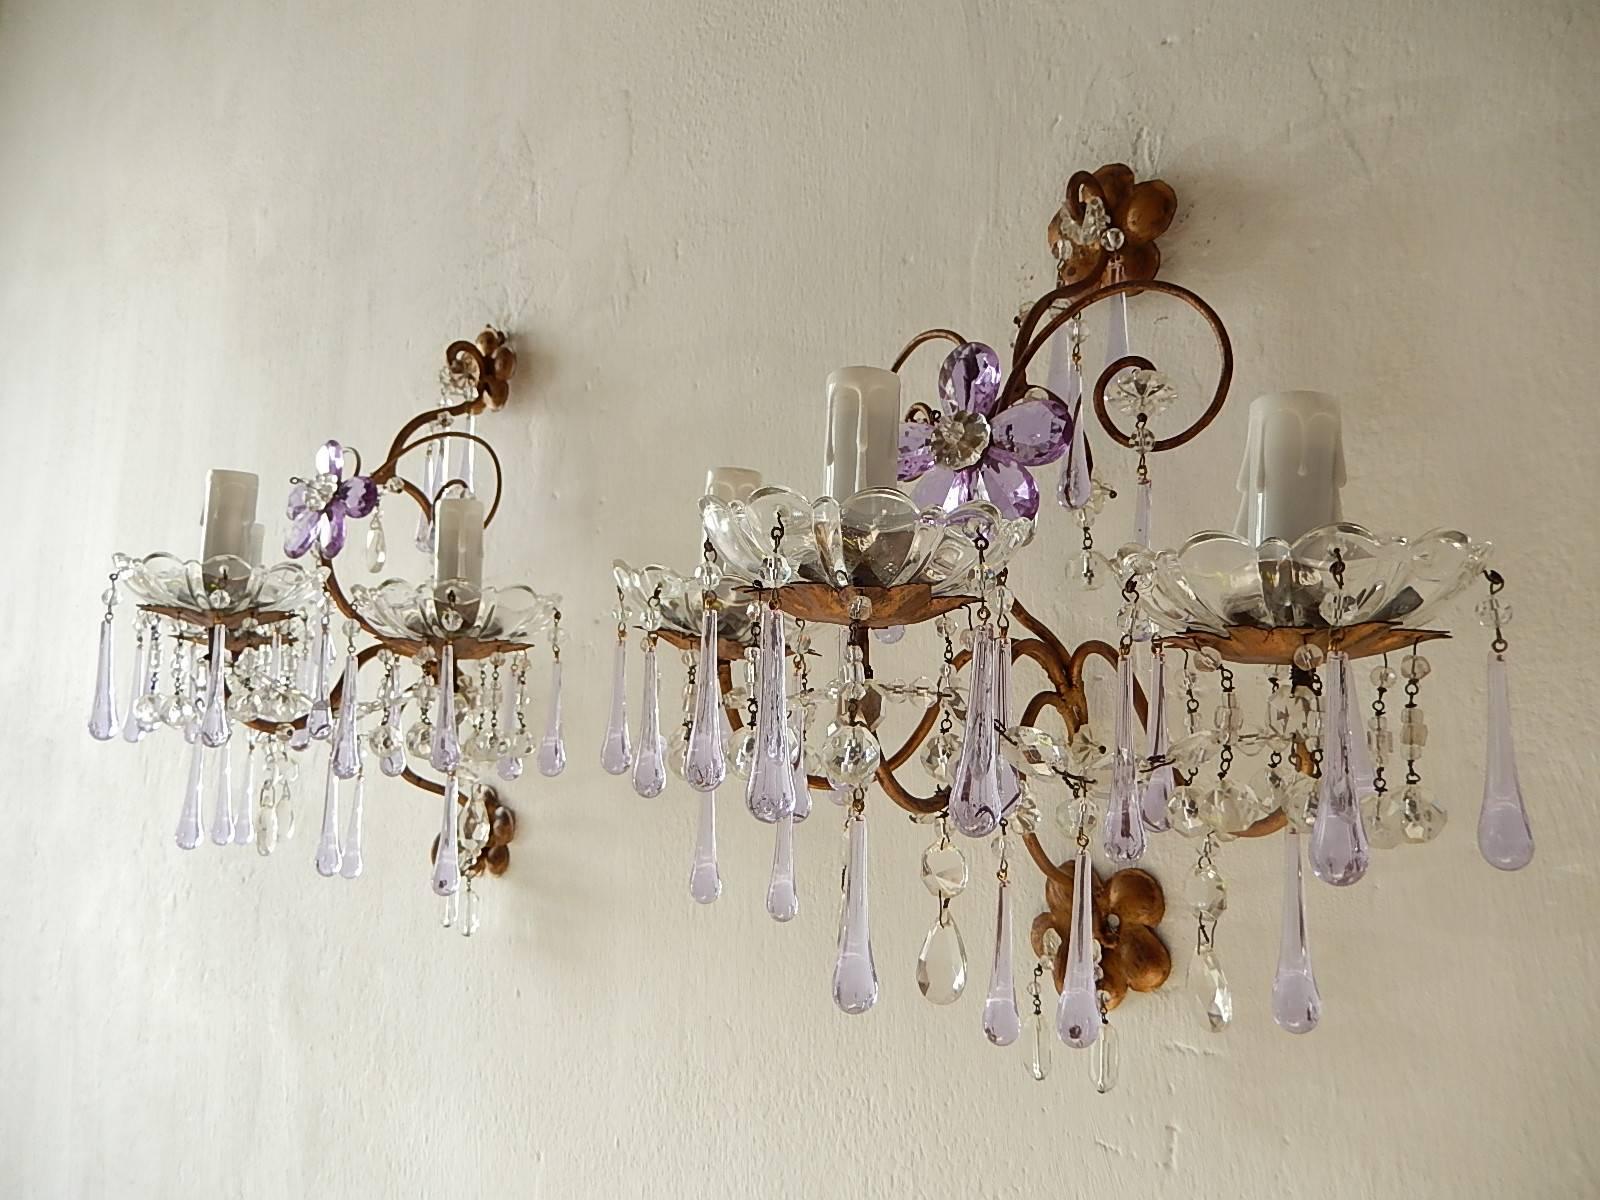 Housing three-light each, rewired and ready to hang. Crystal bobeches dripping with Murano lavender drops and underneath crystal prisms. Big flower in centre made up of lavender prisms. Crystal florets and prisms throughout.